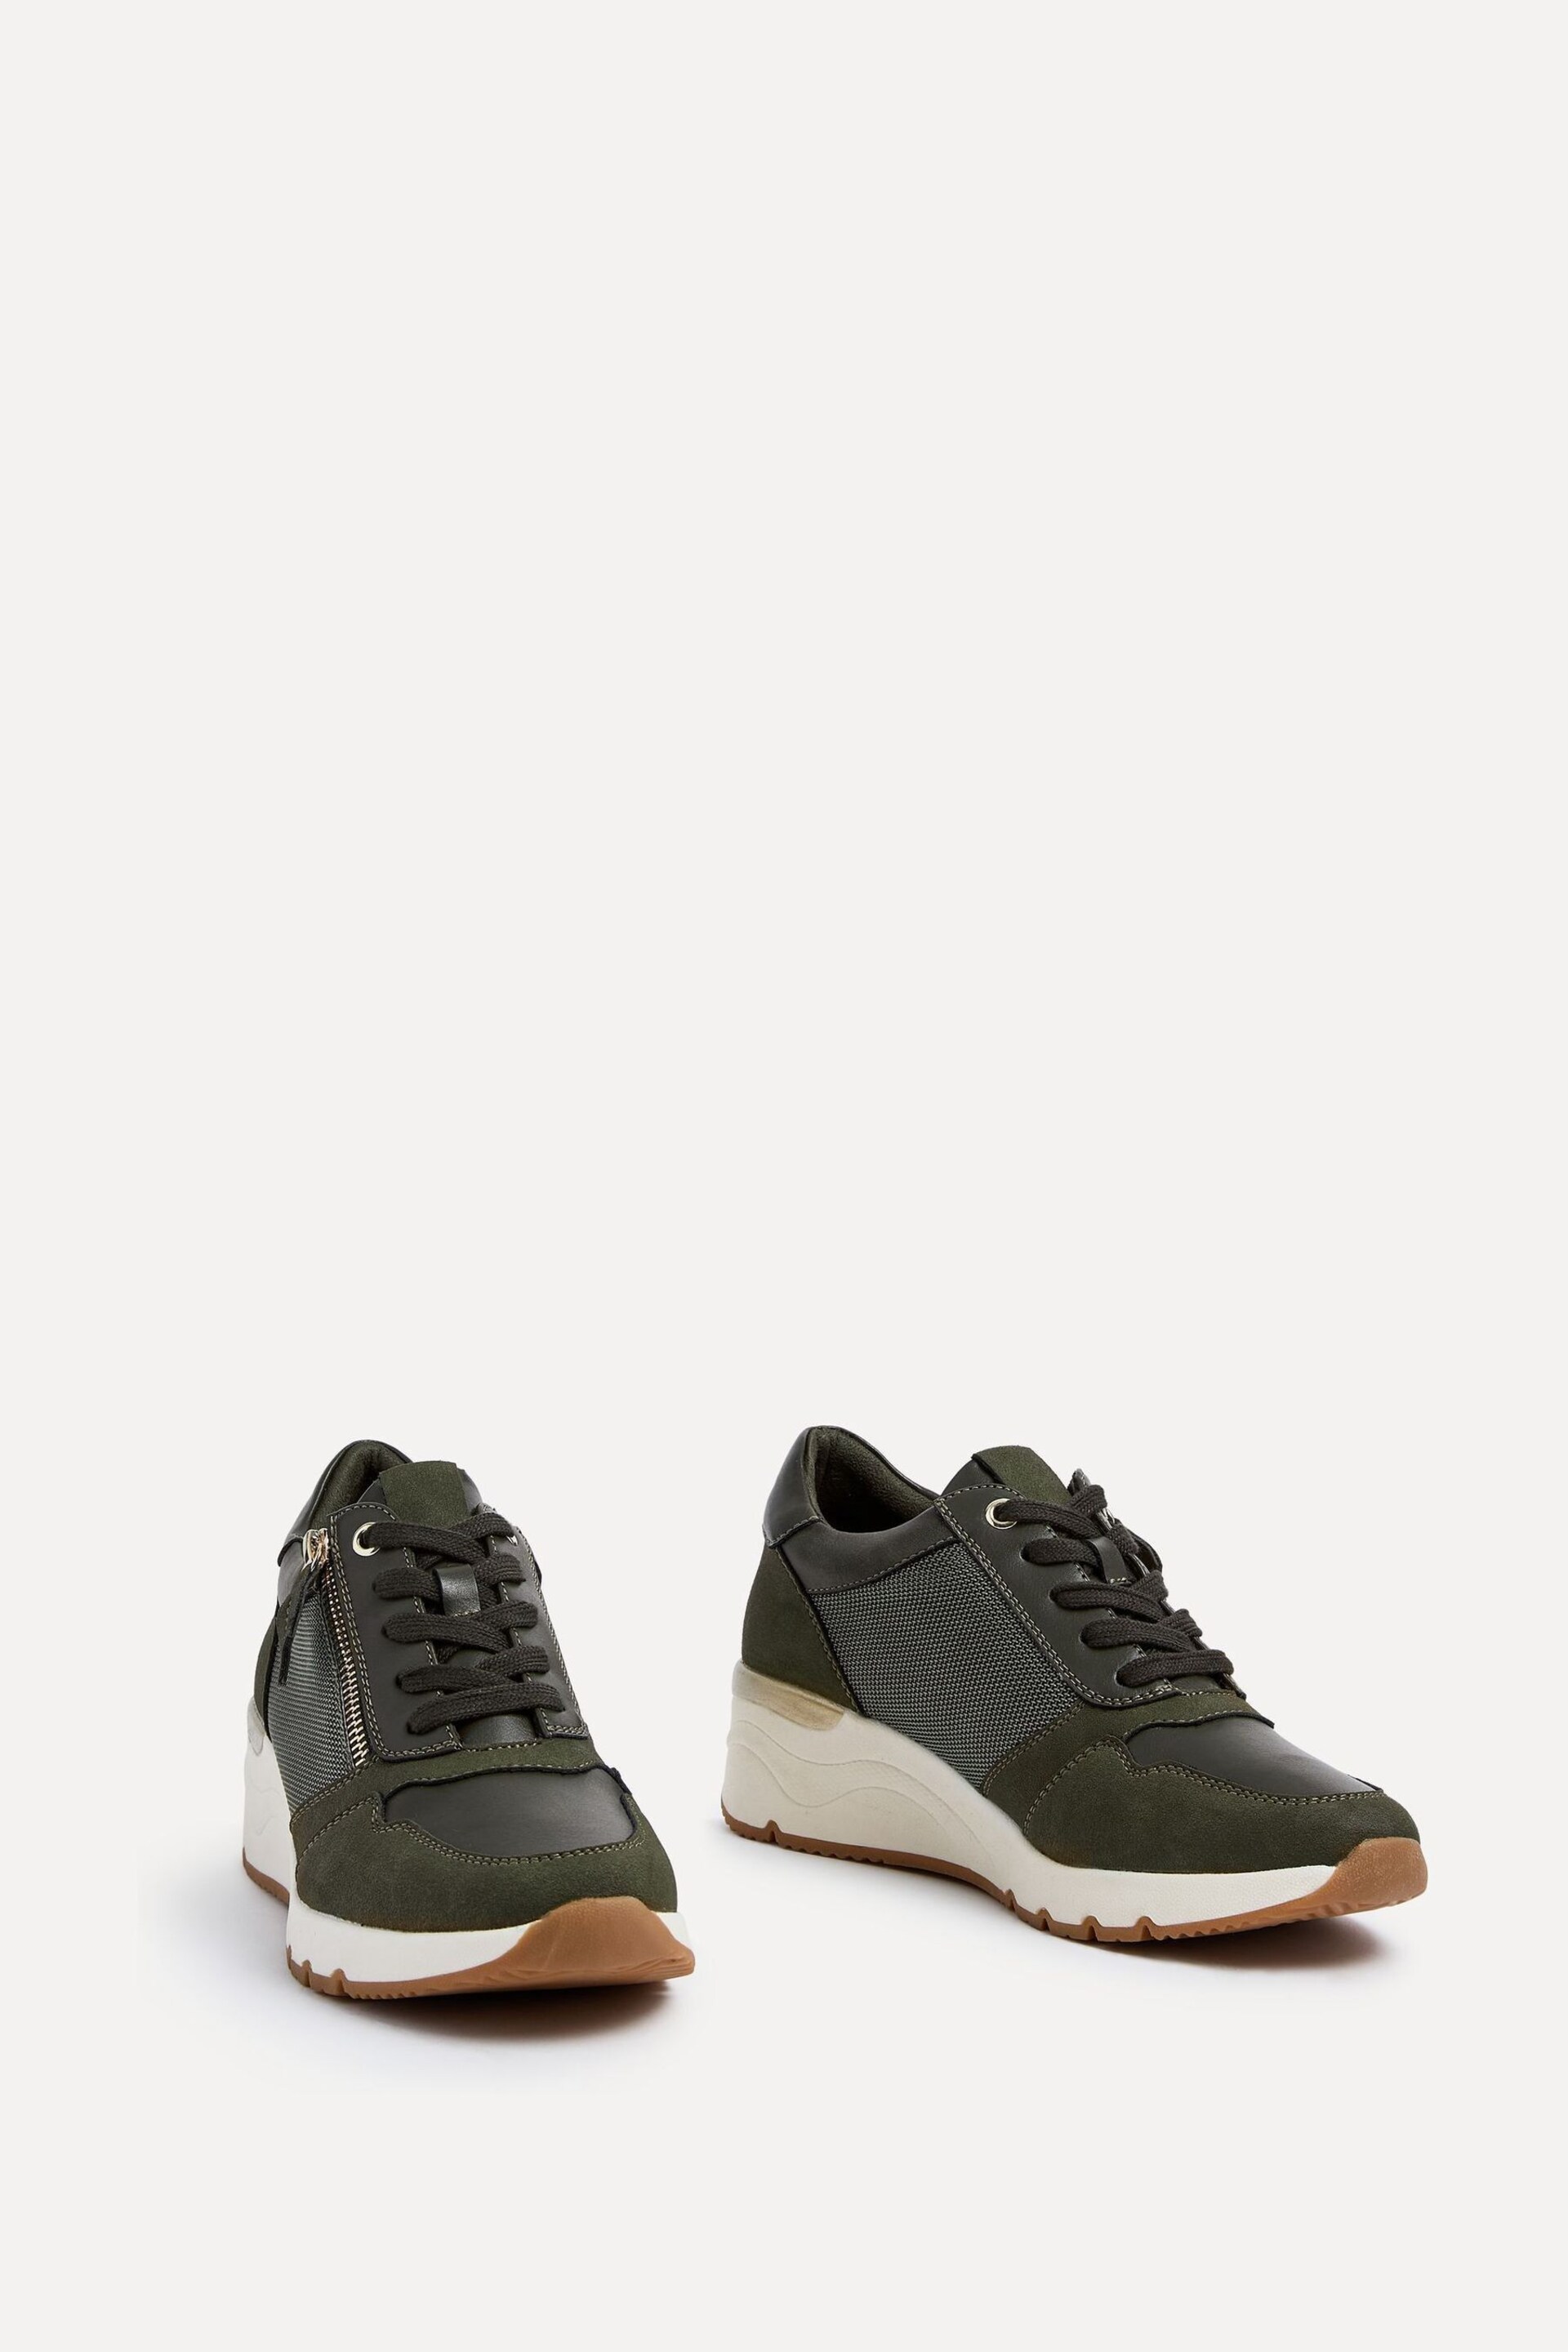 Linzi Green Luca Lace-Up Trainers With Side Zip Detail - Image 3 of 5